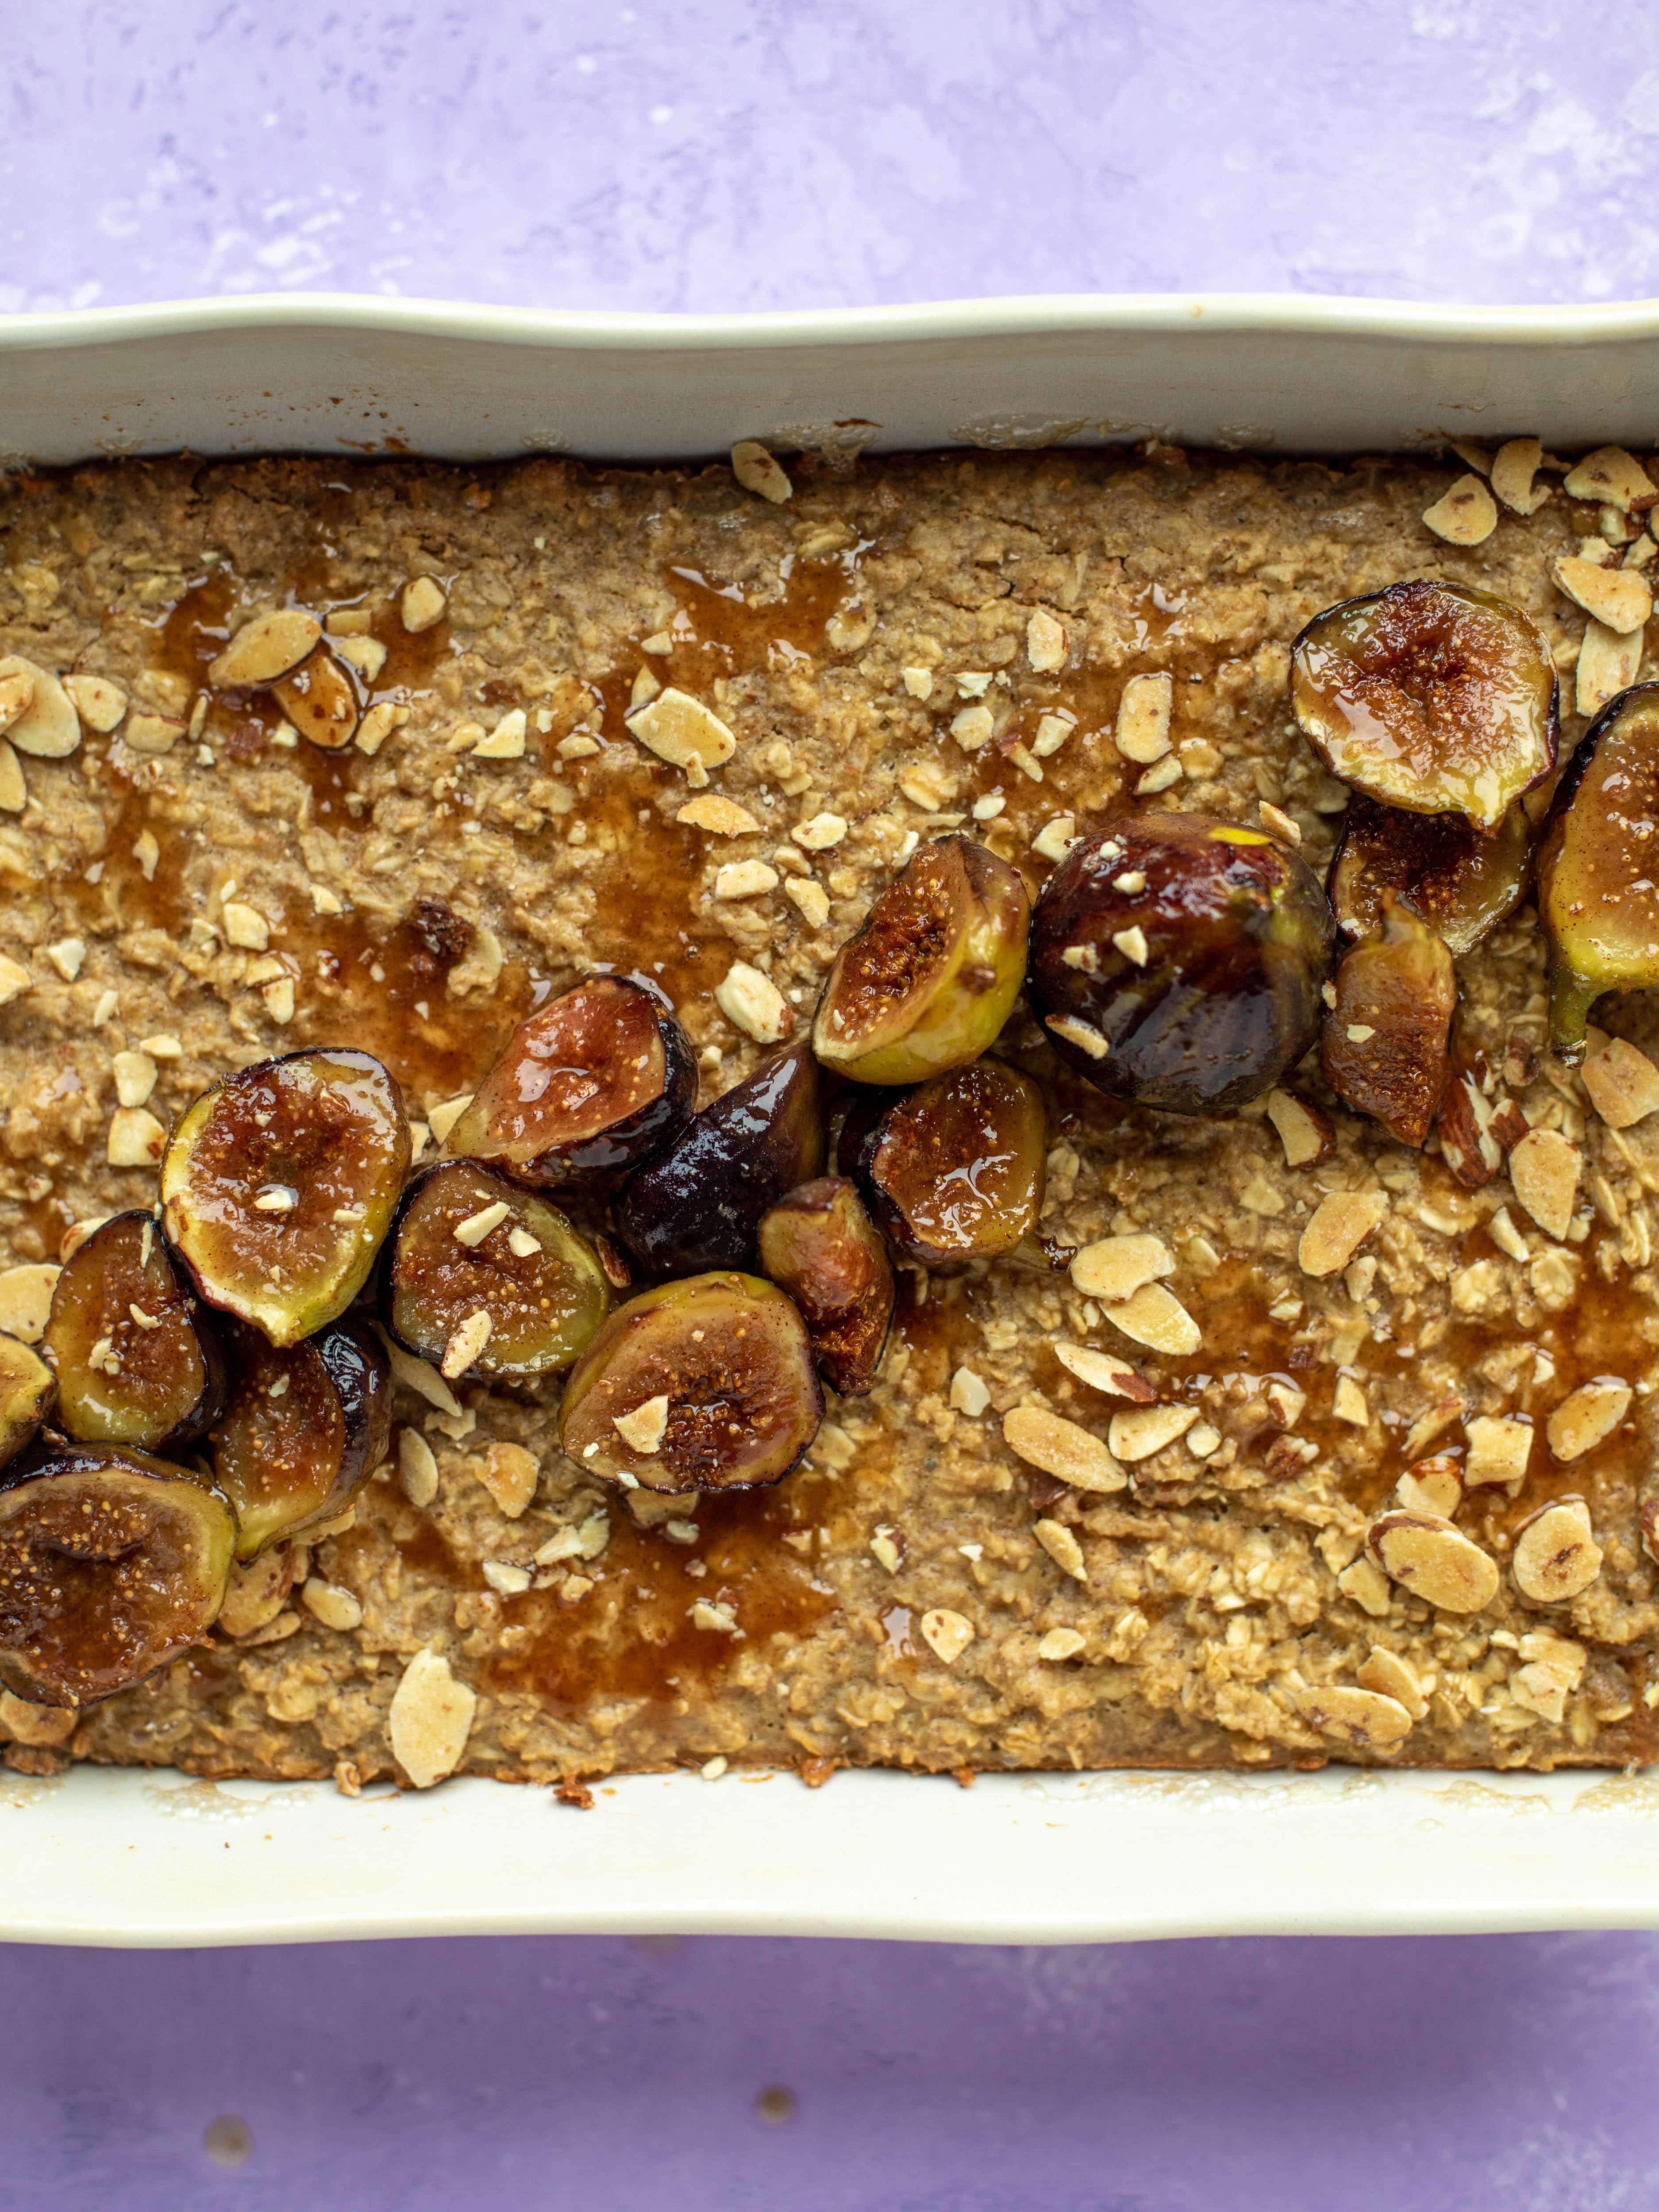 This almond butter baked oatmeal with sticky cinnamon figs is the perfect weekend treat or great for when you have brunch guests!